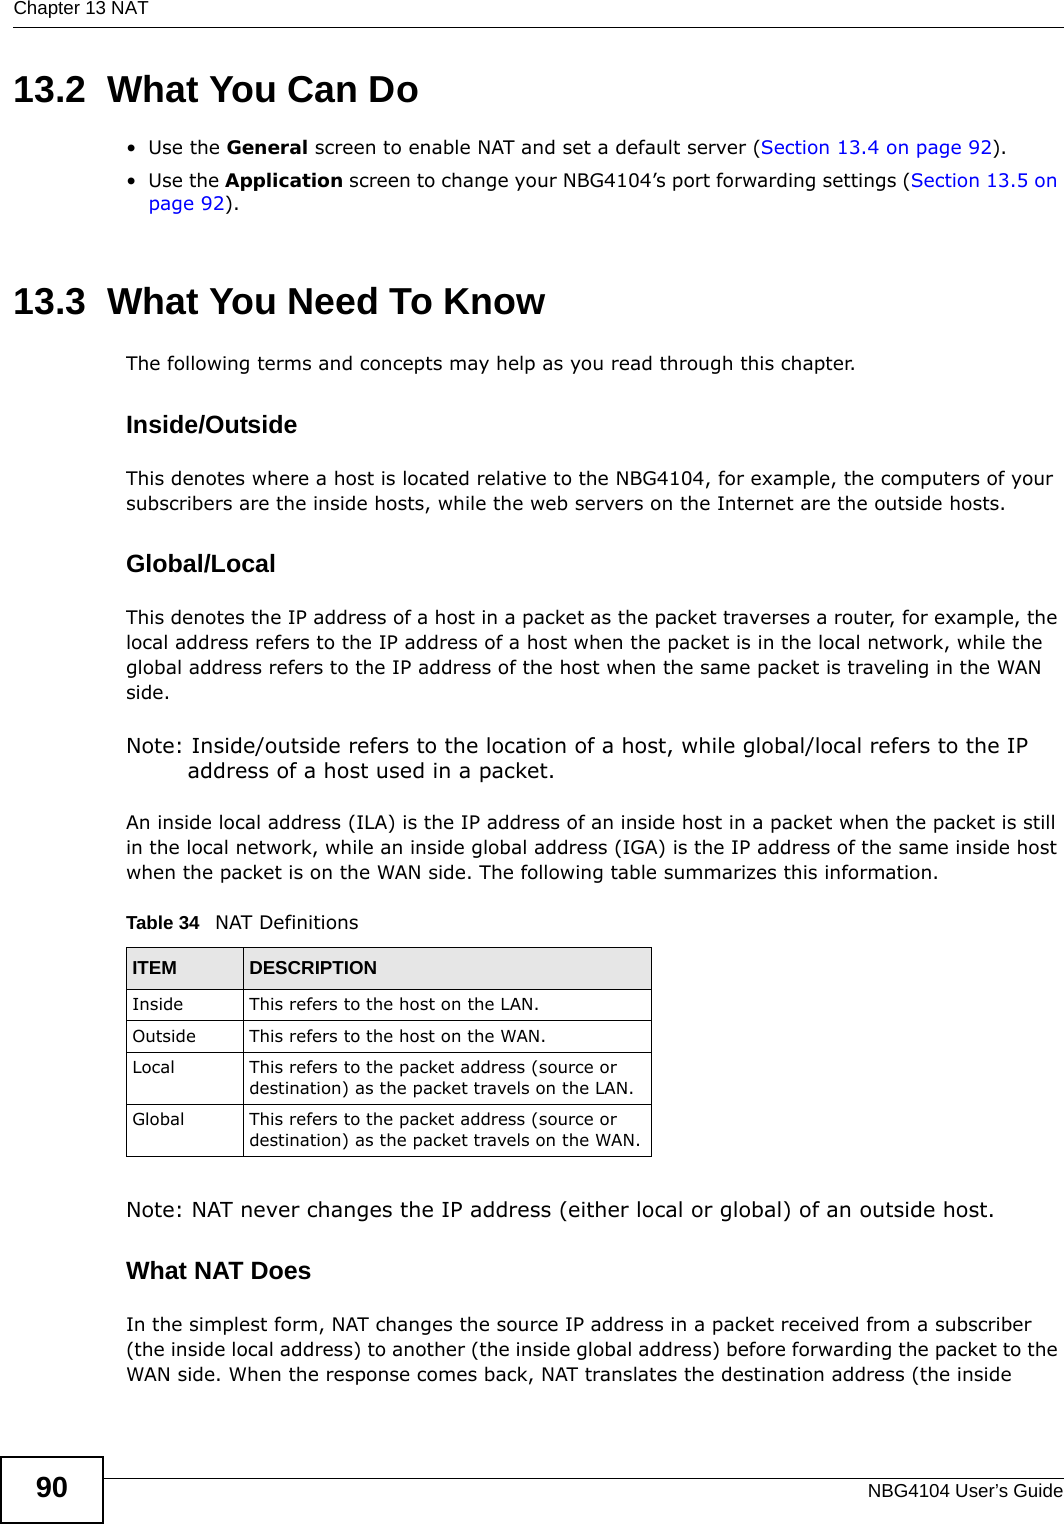 Chapter 13 NATNBG4104 User’s Guide9013.2  What You Can Do•Use the General screen to enable NAT and set a default server (Section 13.4 on page 92).•Use the Application screen to change your NBG4104’s port forwarding settings (Section 13.5 on page 92).13.3  What You Need To KnowThe following terms and concepts may help as you read through this chapter.Inside/OutsideThis denotes where a host is located relative to the NBG4104, for example, the computers of your subscribers are the inside hosts, while the web servers on the Internet are the outside hosts. Global/Local This denotes the IP address of a host in a packet as the packet traverses a router, for example, the local address refers to the IP address of a host when the packet is in the local network, while the global address refers to the IP address of the host when the same packet is traveling in the WAN side. Note: Inside/outside refers to the location of a host, while global/local refers to the IP address of a host used in a packet. An inside local address (ILA) is the IP address of an inside host in a packet when the packet is still in the local network, while an inside global address (IGA) is the IP address of the same inside host when the packet is on the WAN side. The following table summarizes this information.Note: NAT never changes the IP address (either local or global) of an outside host.What NAT DoesIn the simplest form, NAT changes the source IP address in a packet received from a subscriber (the inside local address) to another (the inside global address) before forwarding the packet to the WAN side. When the response comes back, NAT translates the destination address (the inside Table 34   NAT DefinitionsITEM DESCRIPTIONInside This refers to the host on the LAN.Outside This refers to the host on the WAN.Local This refers to the packet address (source or destination) as the packet travels on the LAN.Global This refers to the packet address (source or destination) as the packet travels on the WAN.